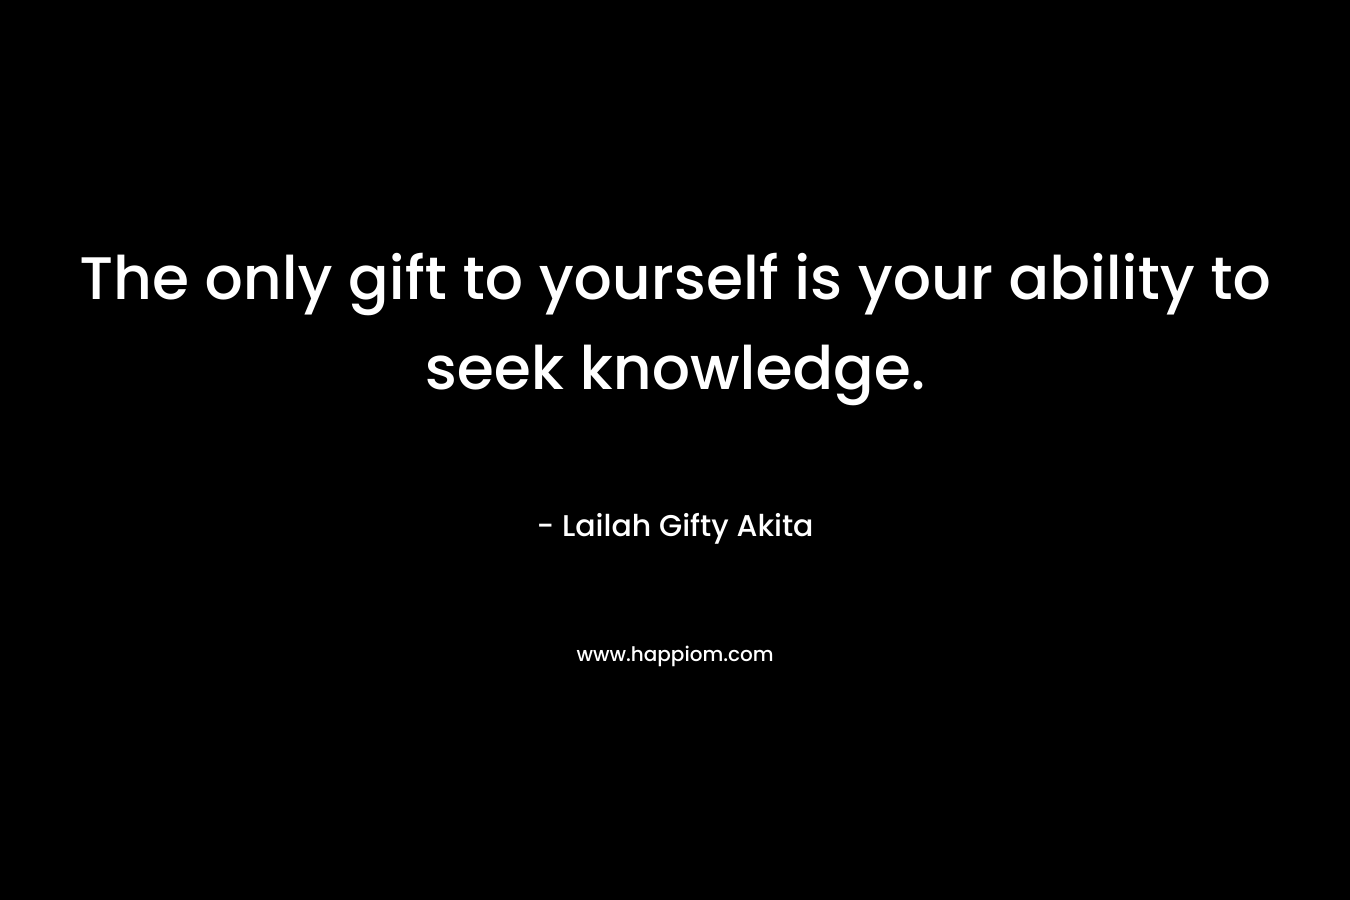 The only gift to yourself is your ability to seek knowledge.